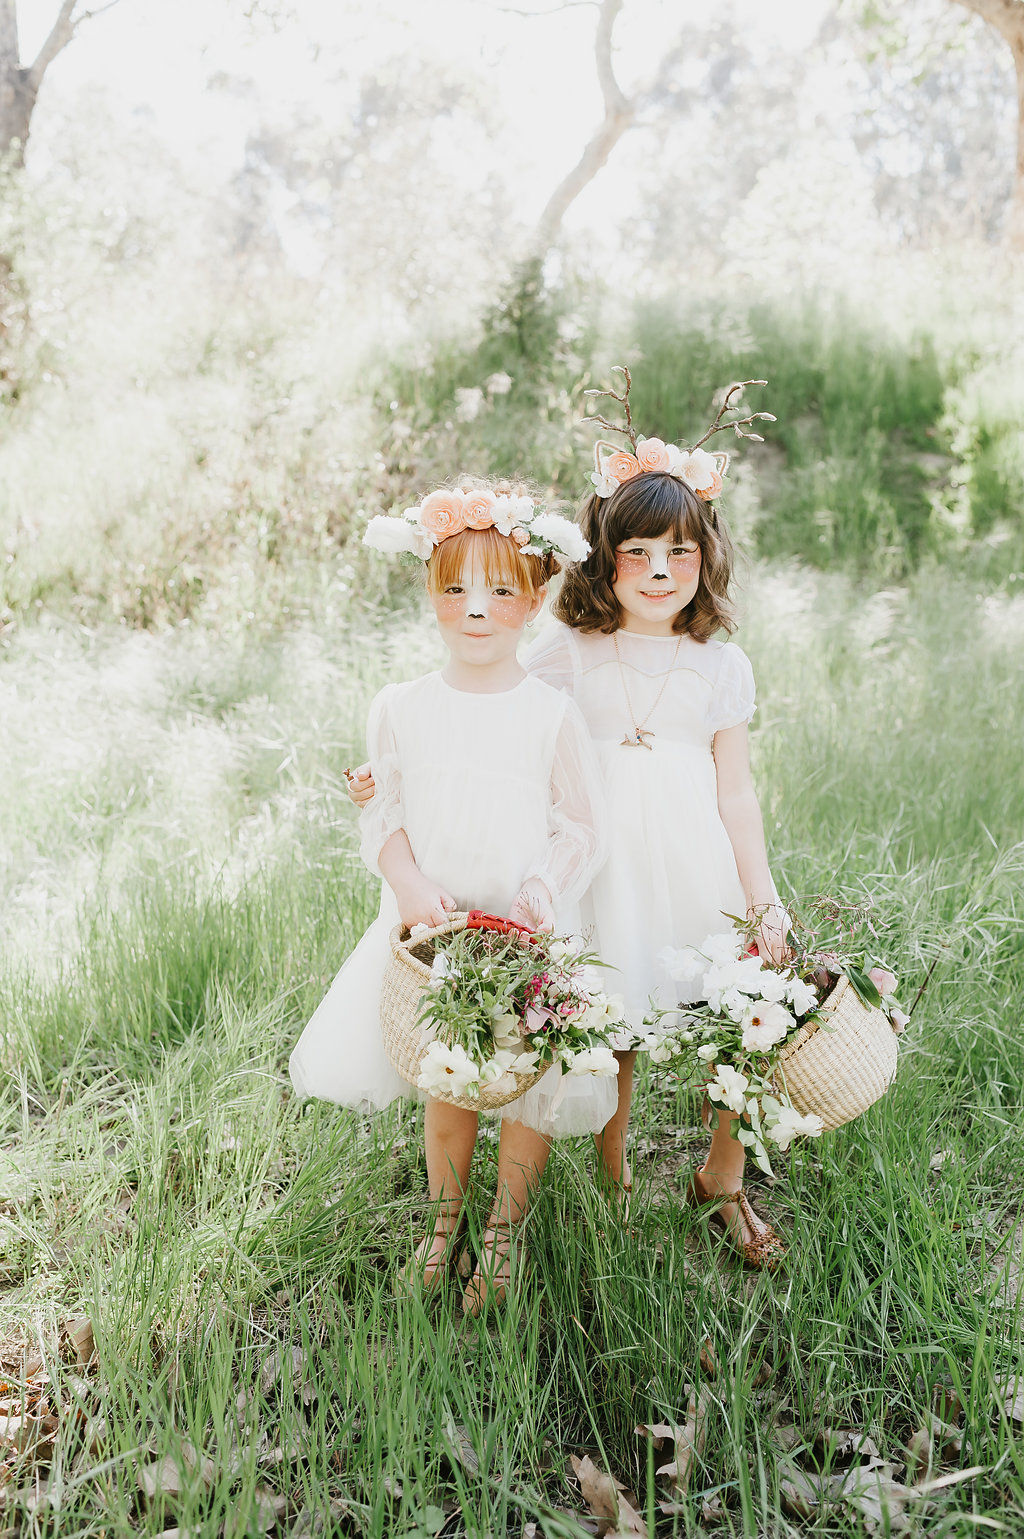 Flora & Fauna – The Sweetest Spring Party for the Girls